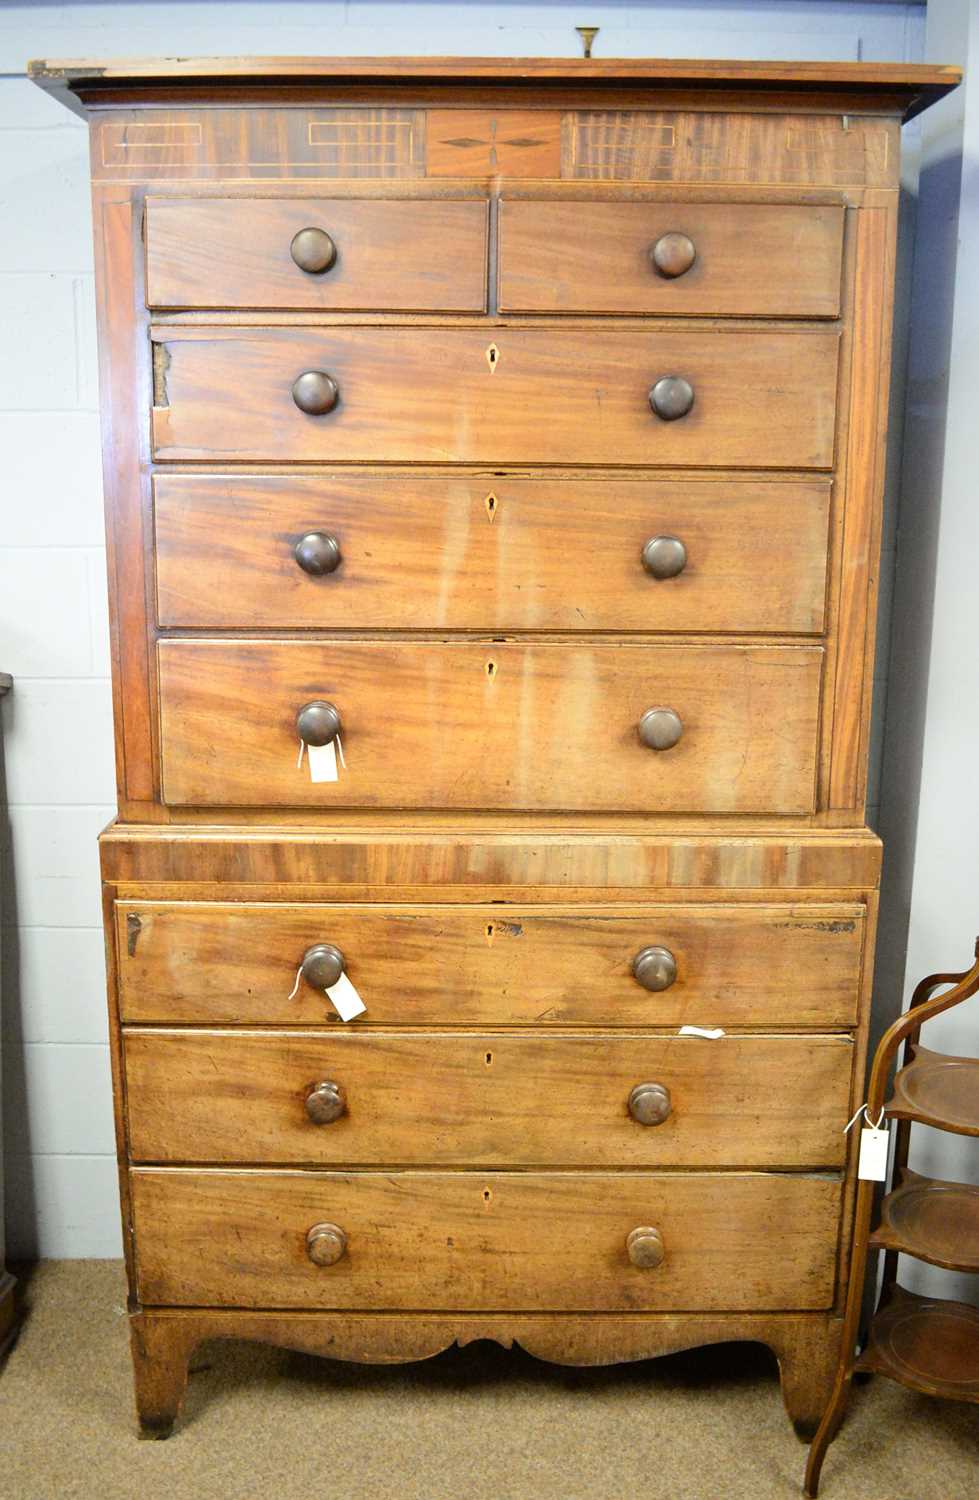 A Victorian chest-on-chest